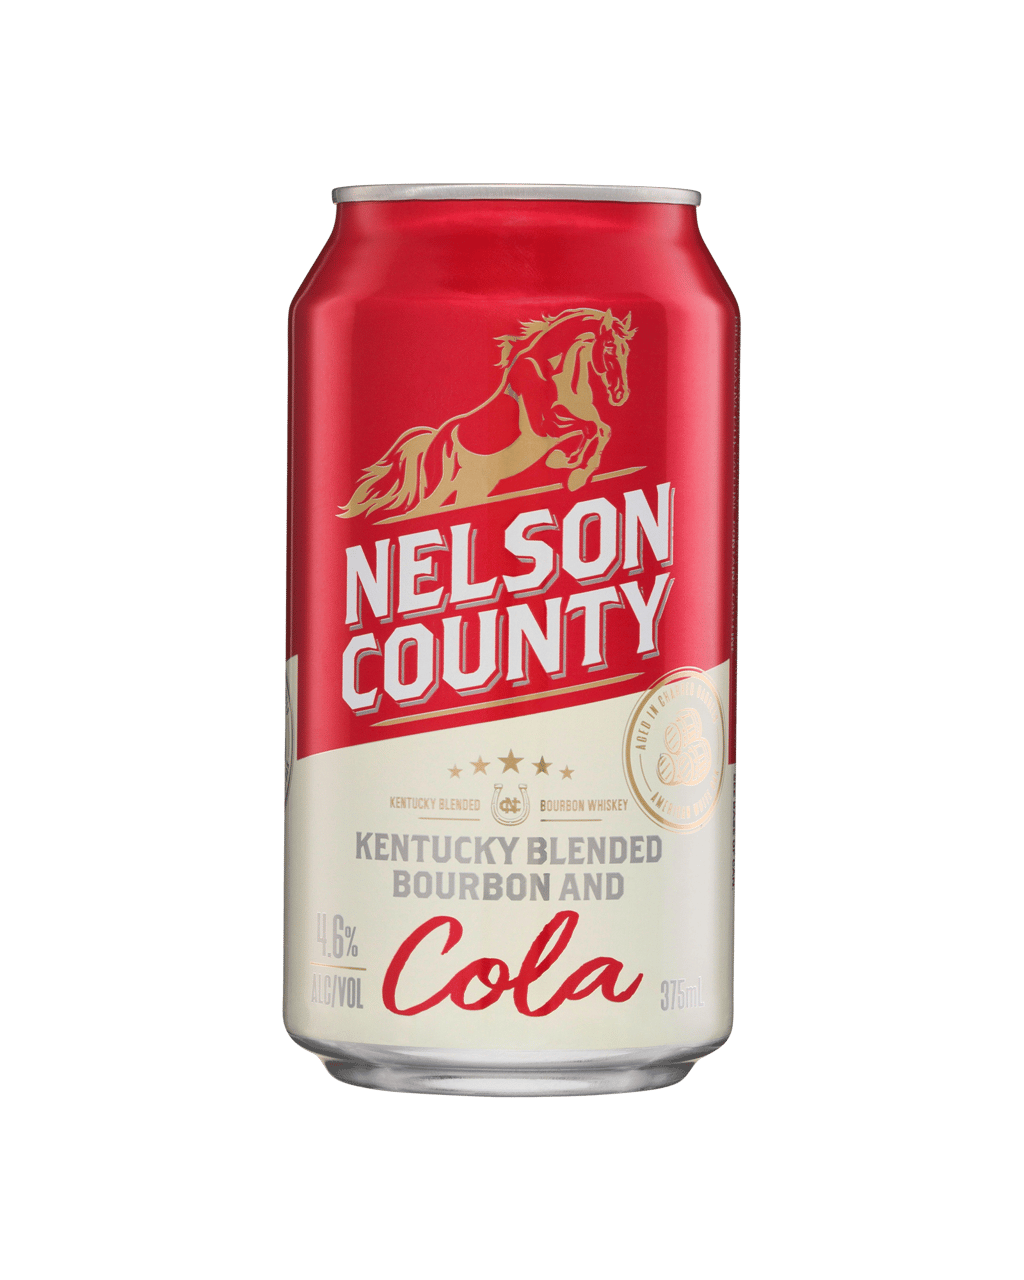 Image - Kentucky Blended Bourbon and Cola by Nelson County